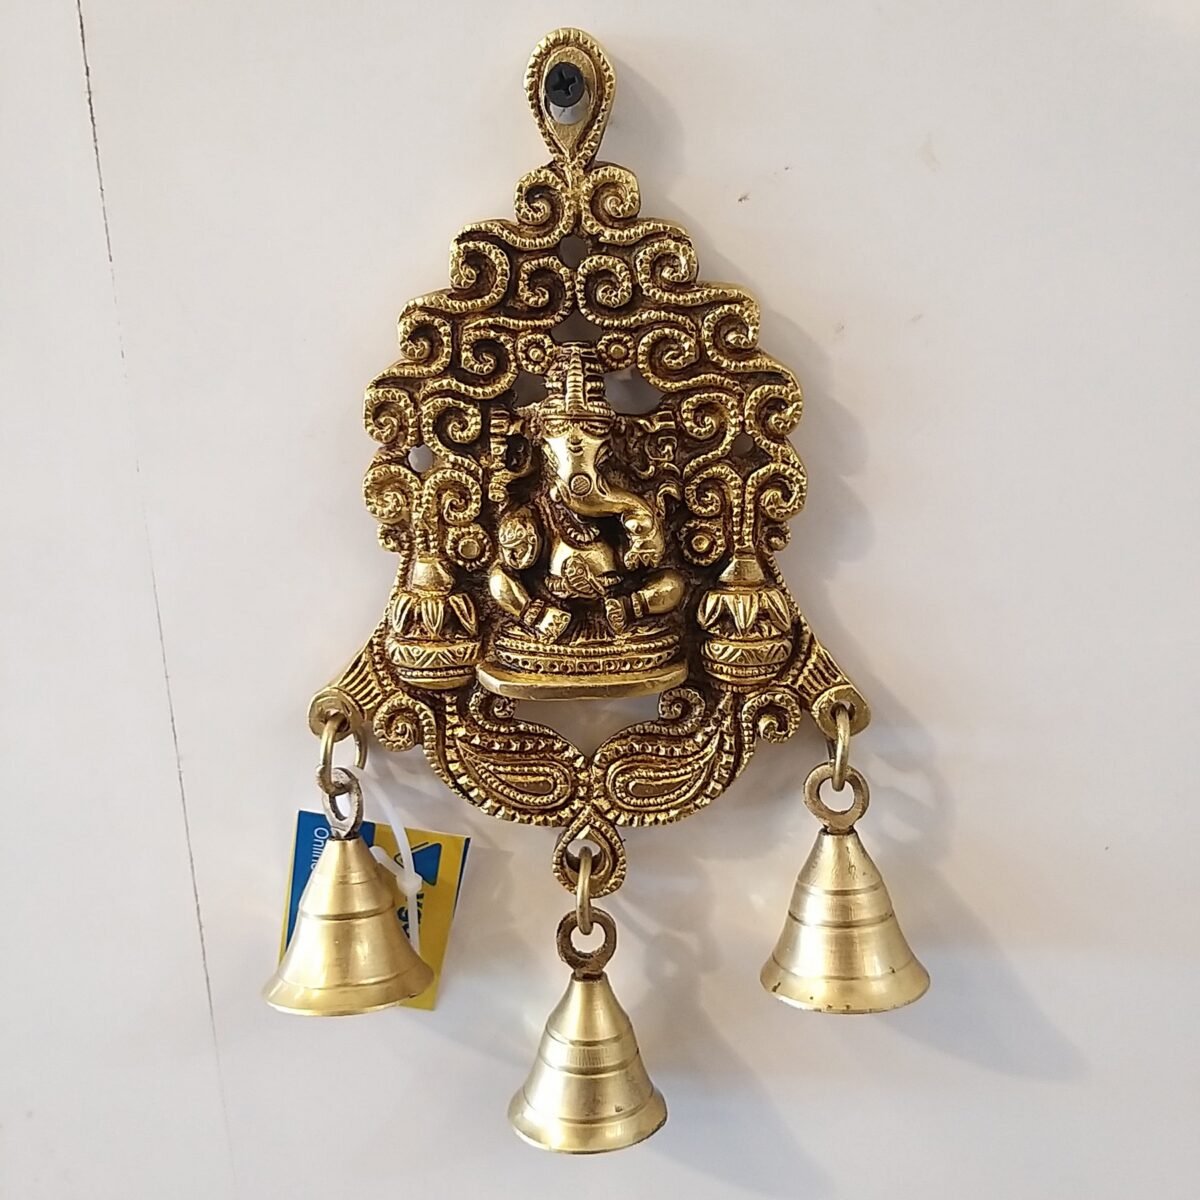 brass ganesha wall hanging small with bell home decor wall decor pooja items showpiece temple auspicious gift present buy online india 10193